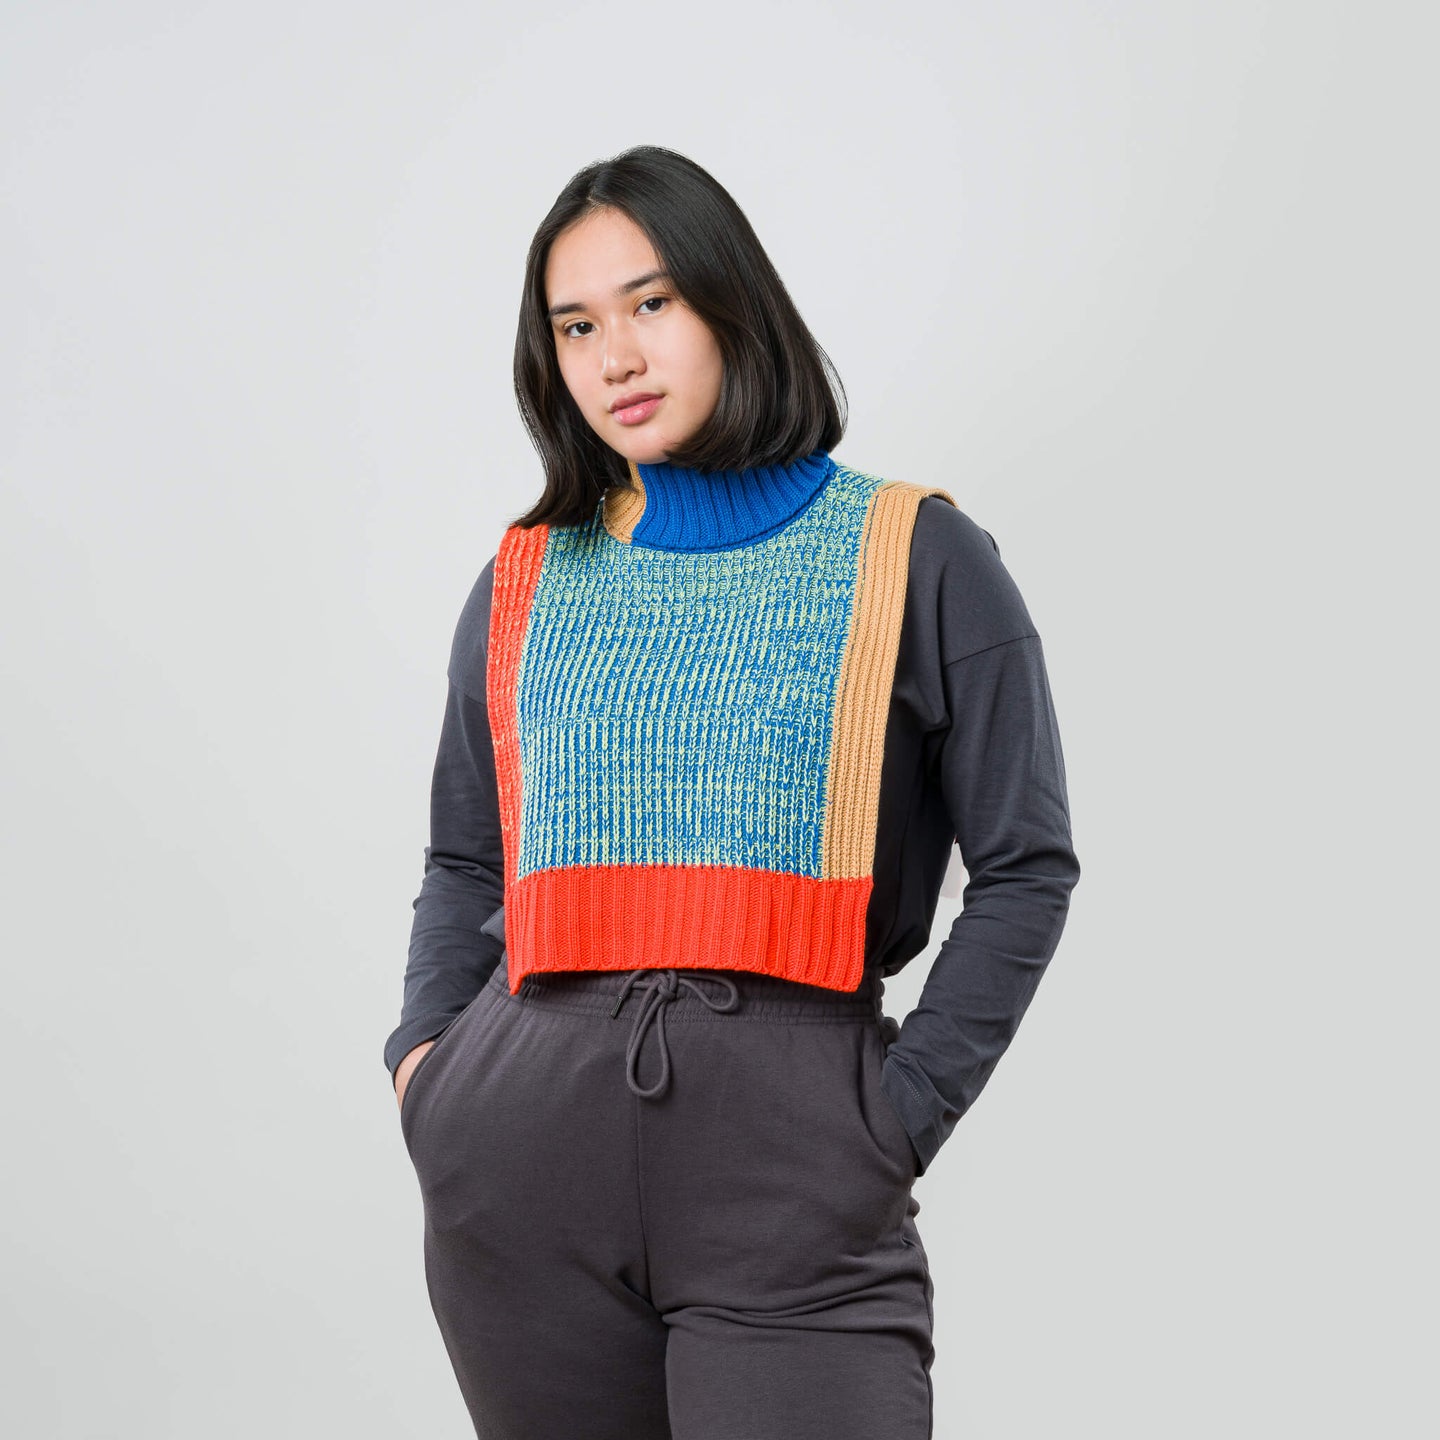 Knit Dickie Static Swatch Marled Tabard Turtleneck